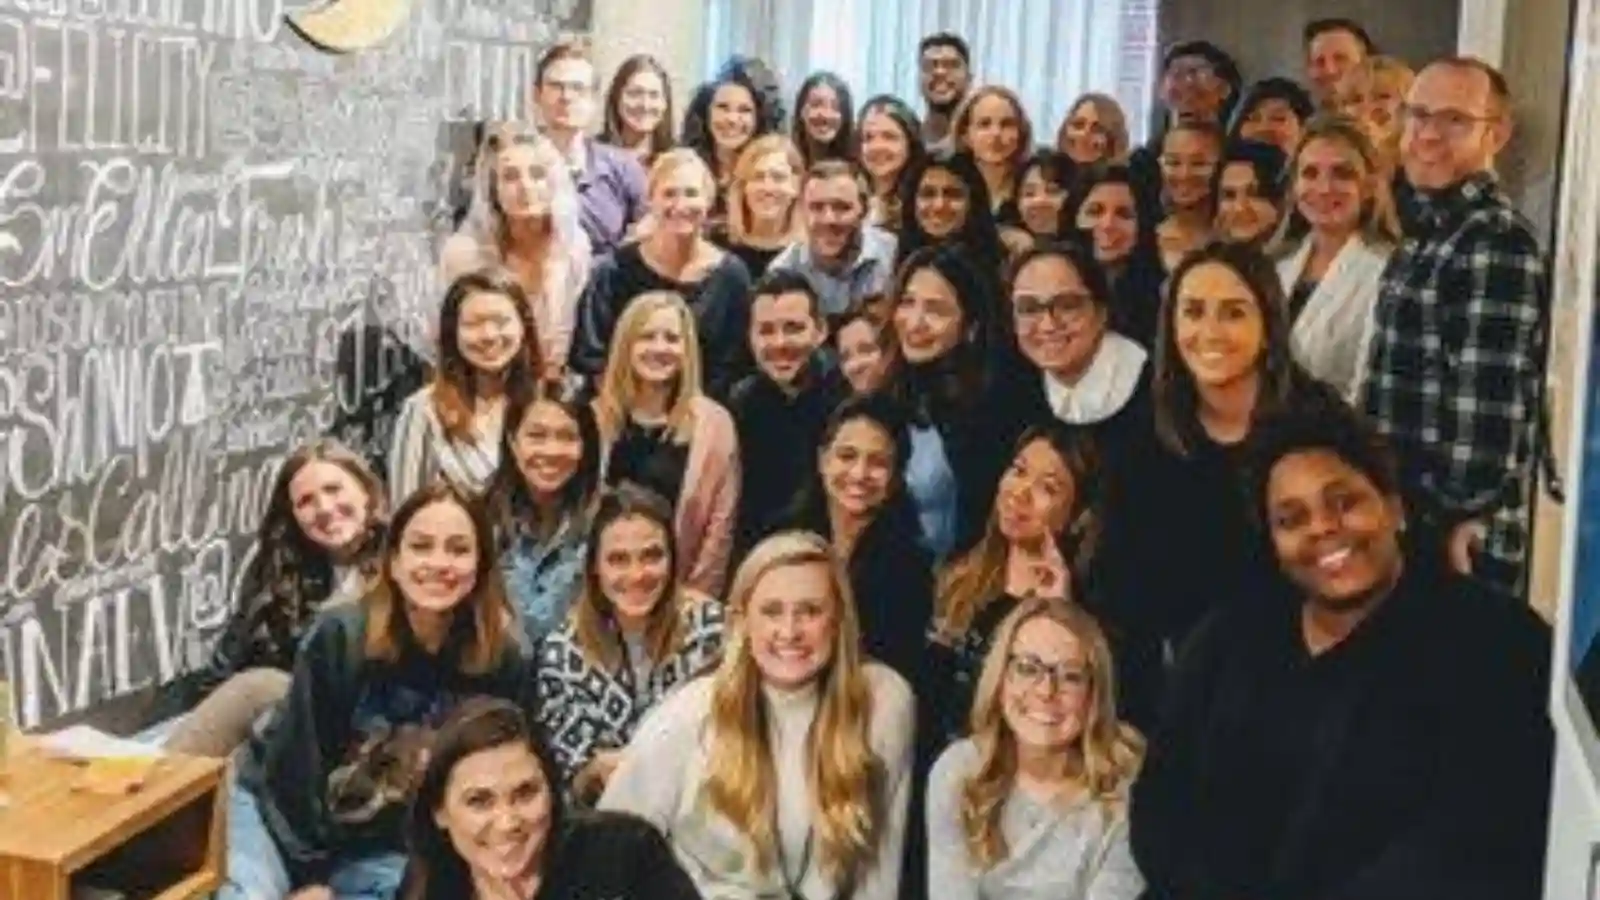 Diverse employees at Twitter